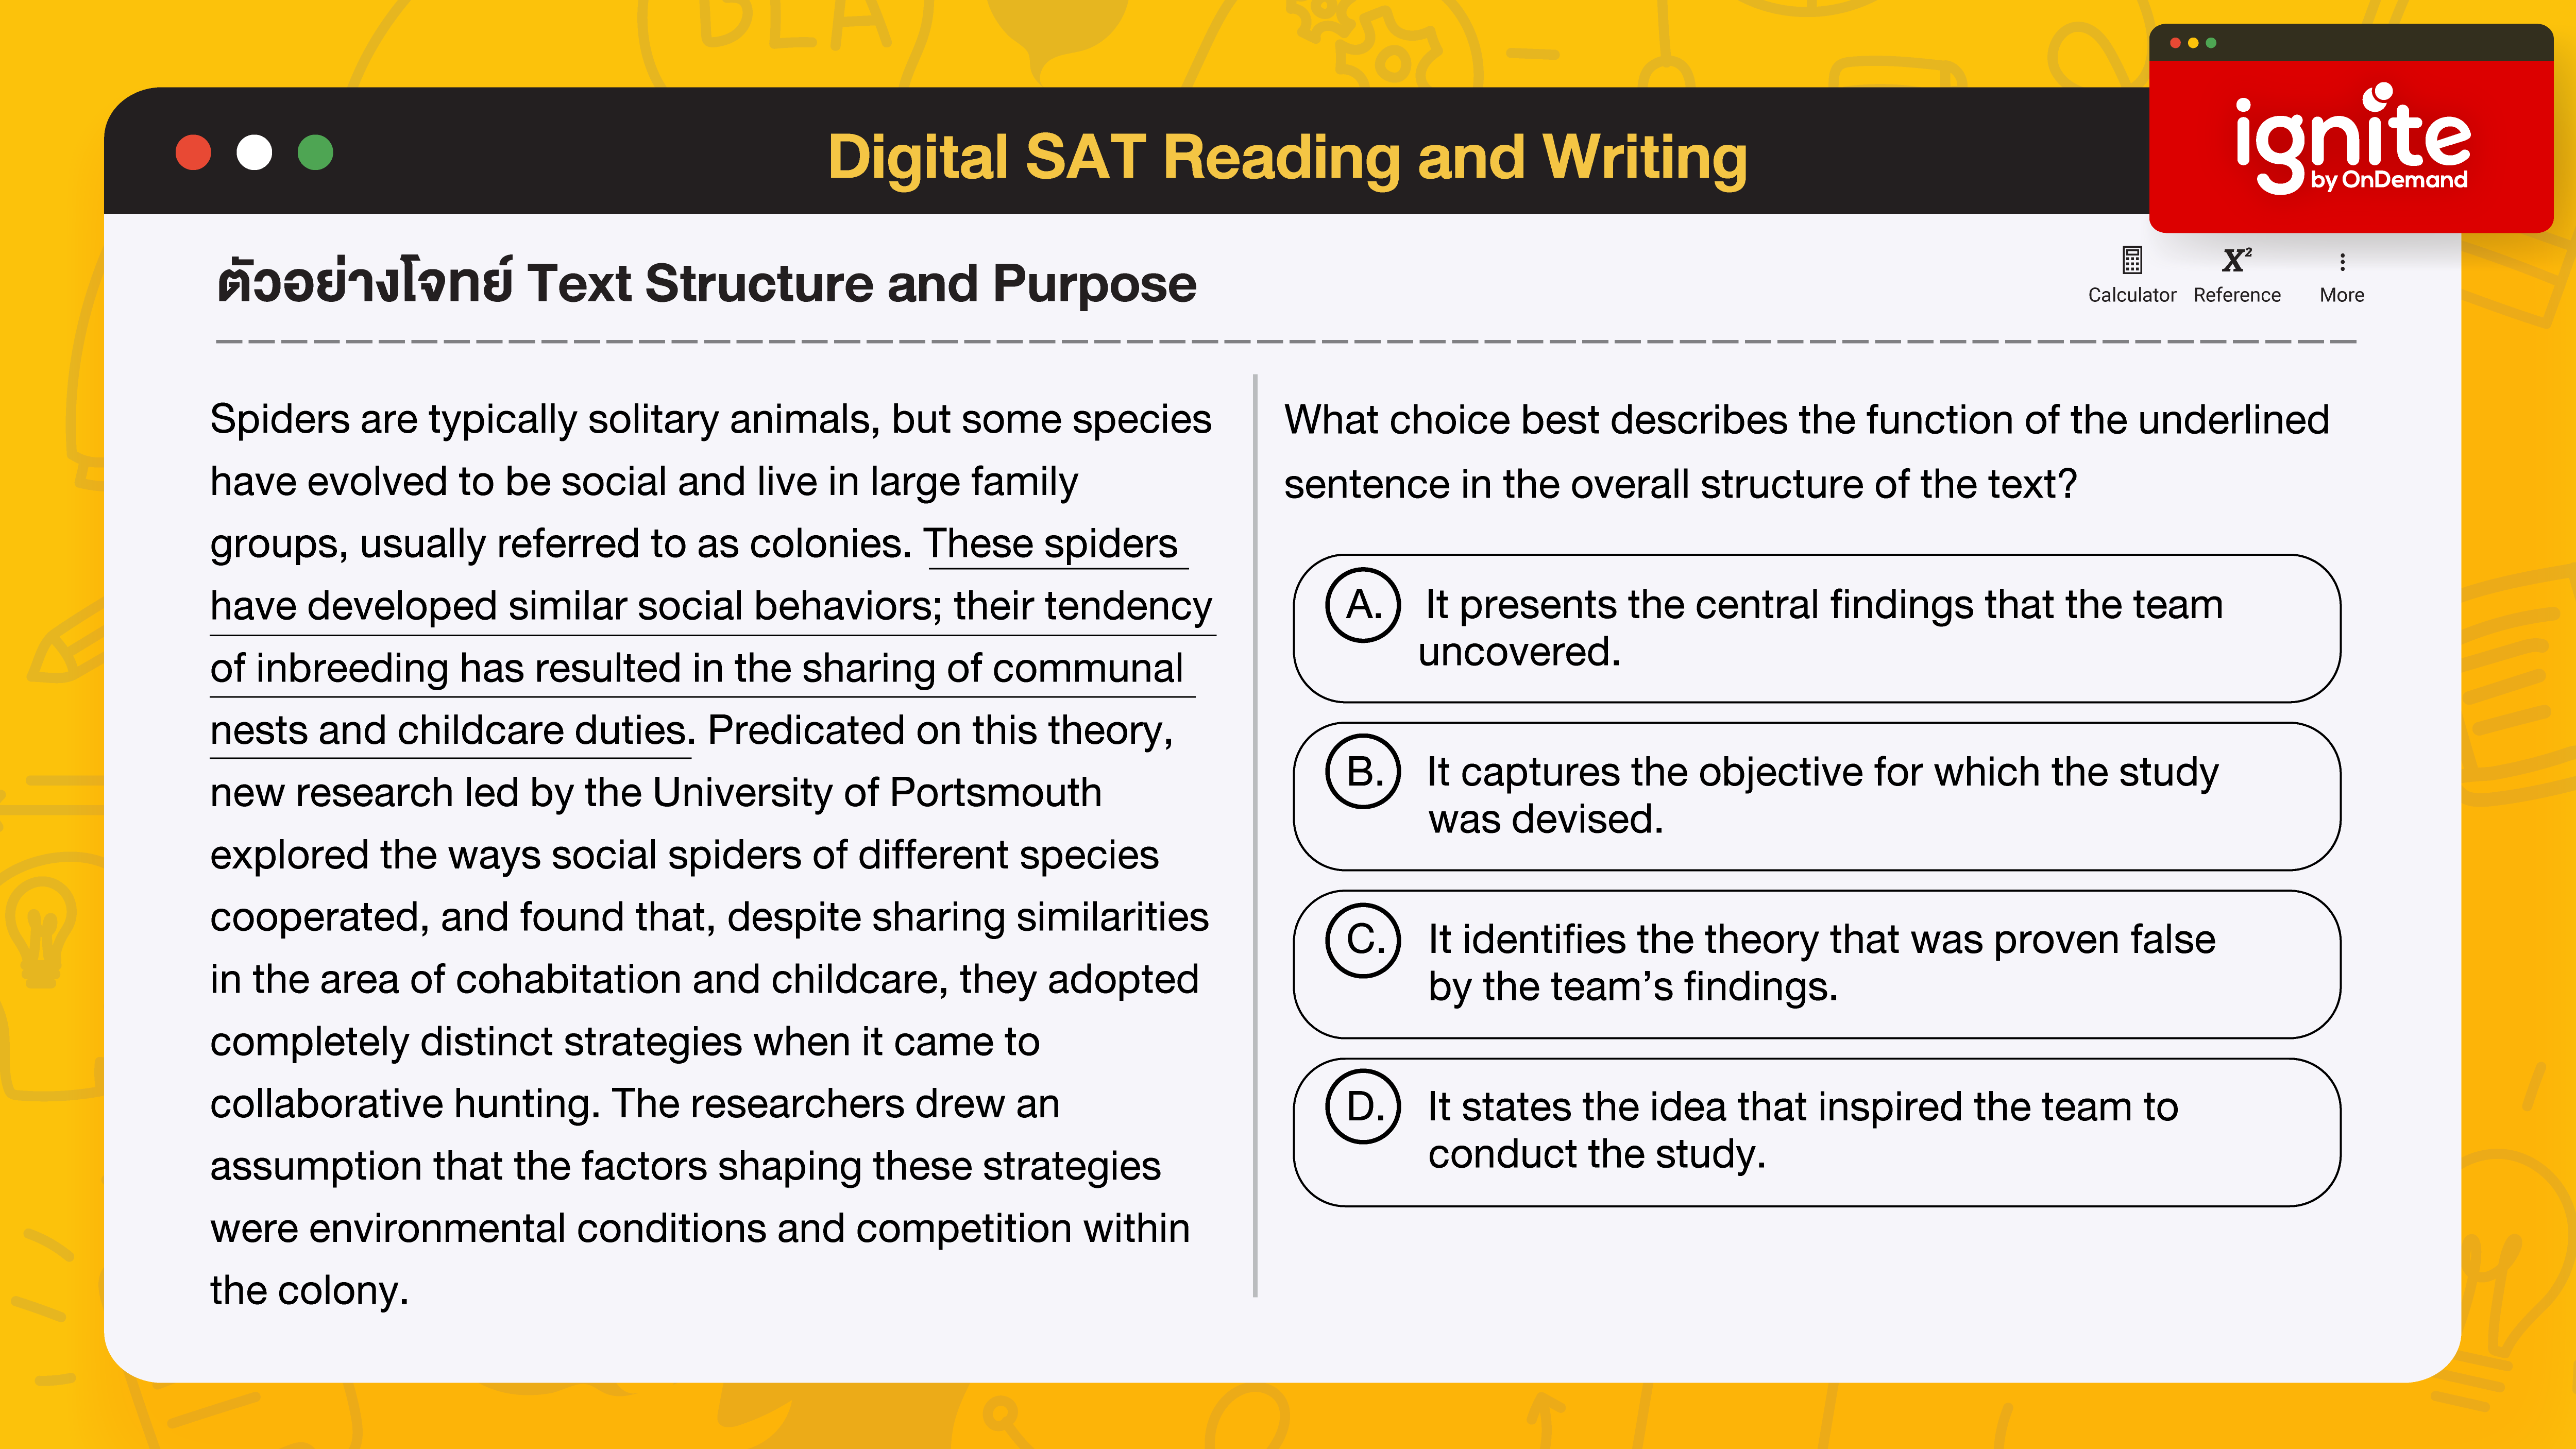 Text Structure and Purpose - Digital SAT Reading and Wrting 2023 - ignite by OnDemand